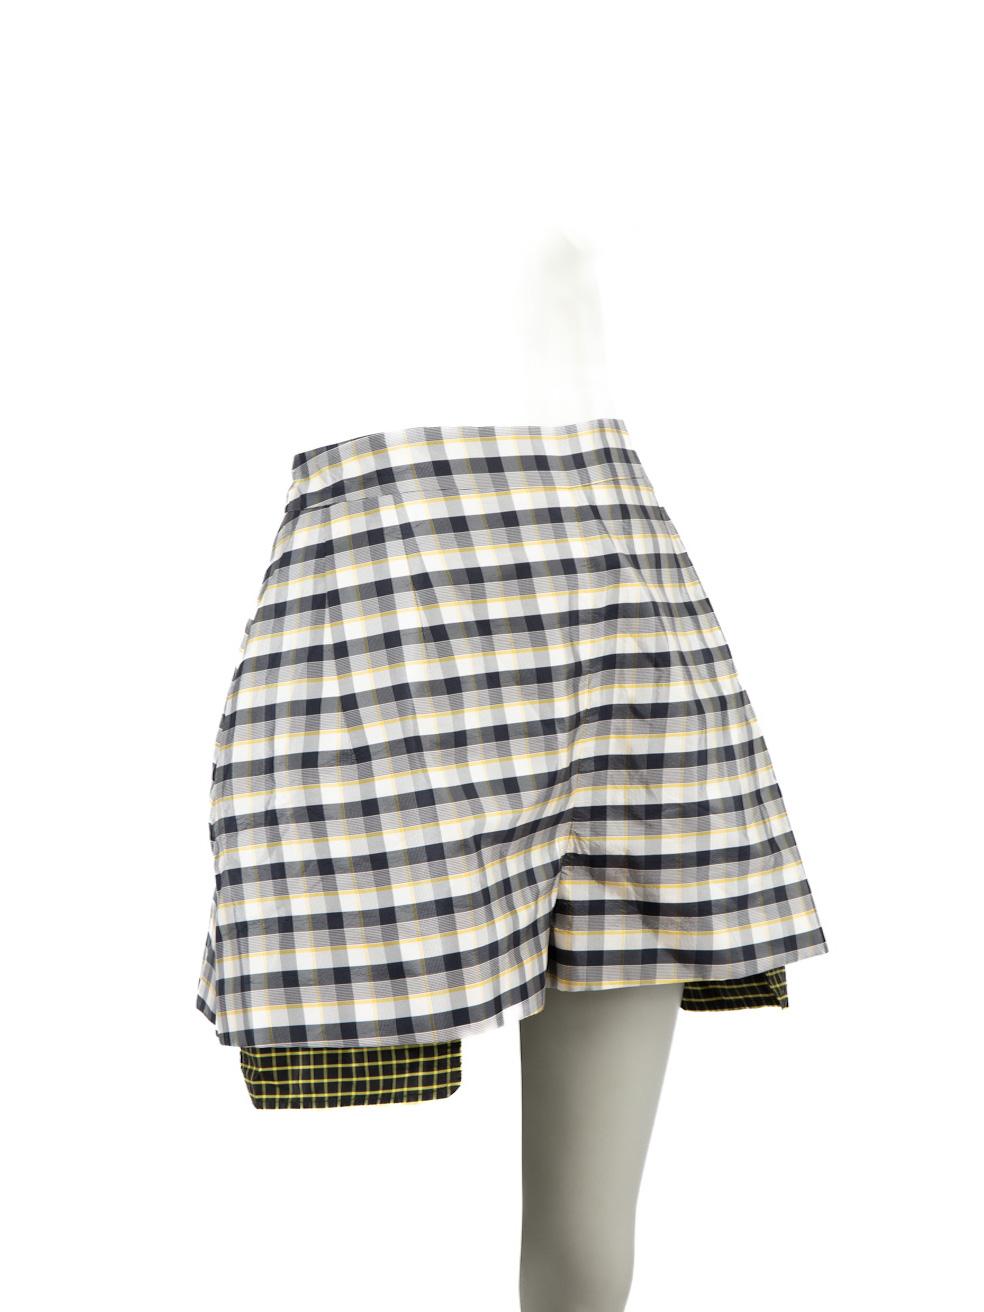 CONDITION is Very good. Hardly any visible wear to shorts is evident on this used Dior designer resale item.
 
Details
Multicolour
Silk
Shorts
Gingham pattern
Visible pocket lining
2x Side pockets
Side zip and hook fastening

Made in Italy
